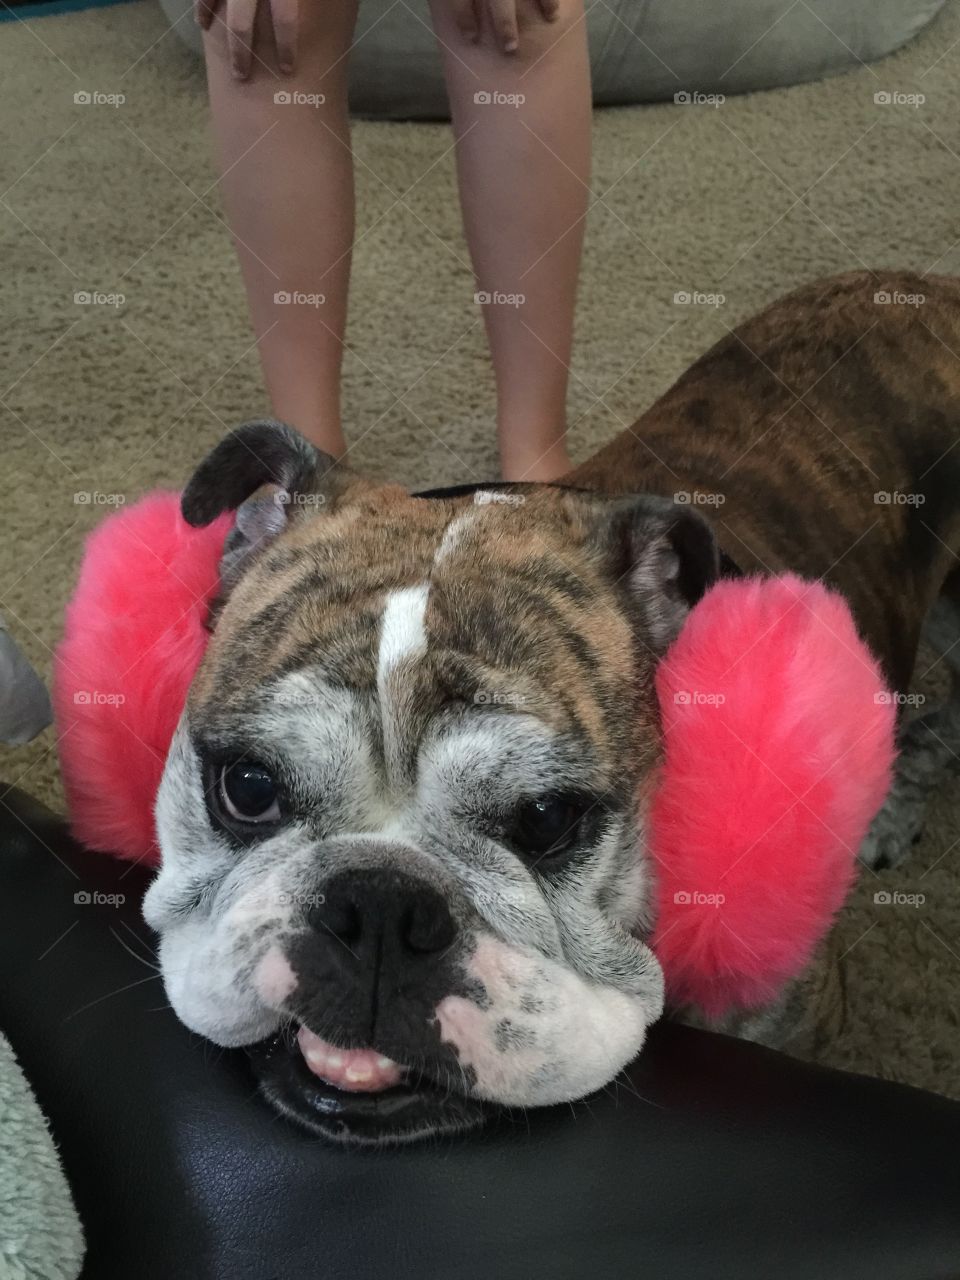 Dog with earmuffs. Kids just wanted to try their earmuffs on my dog